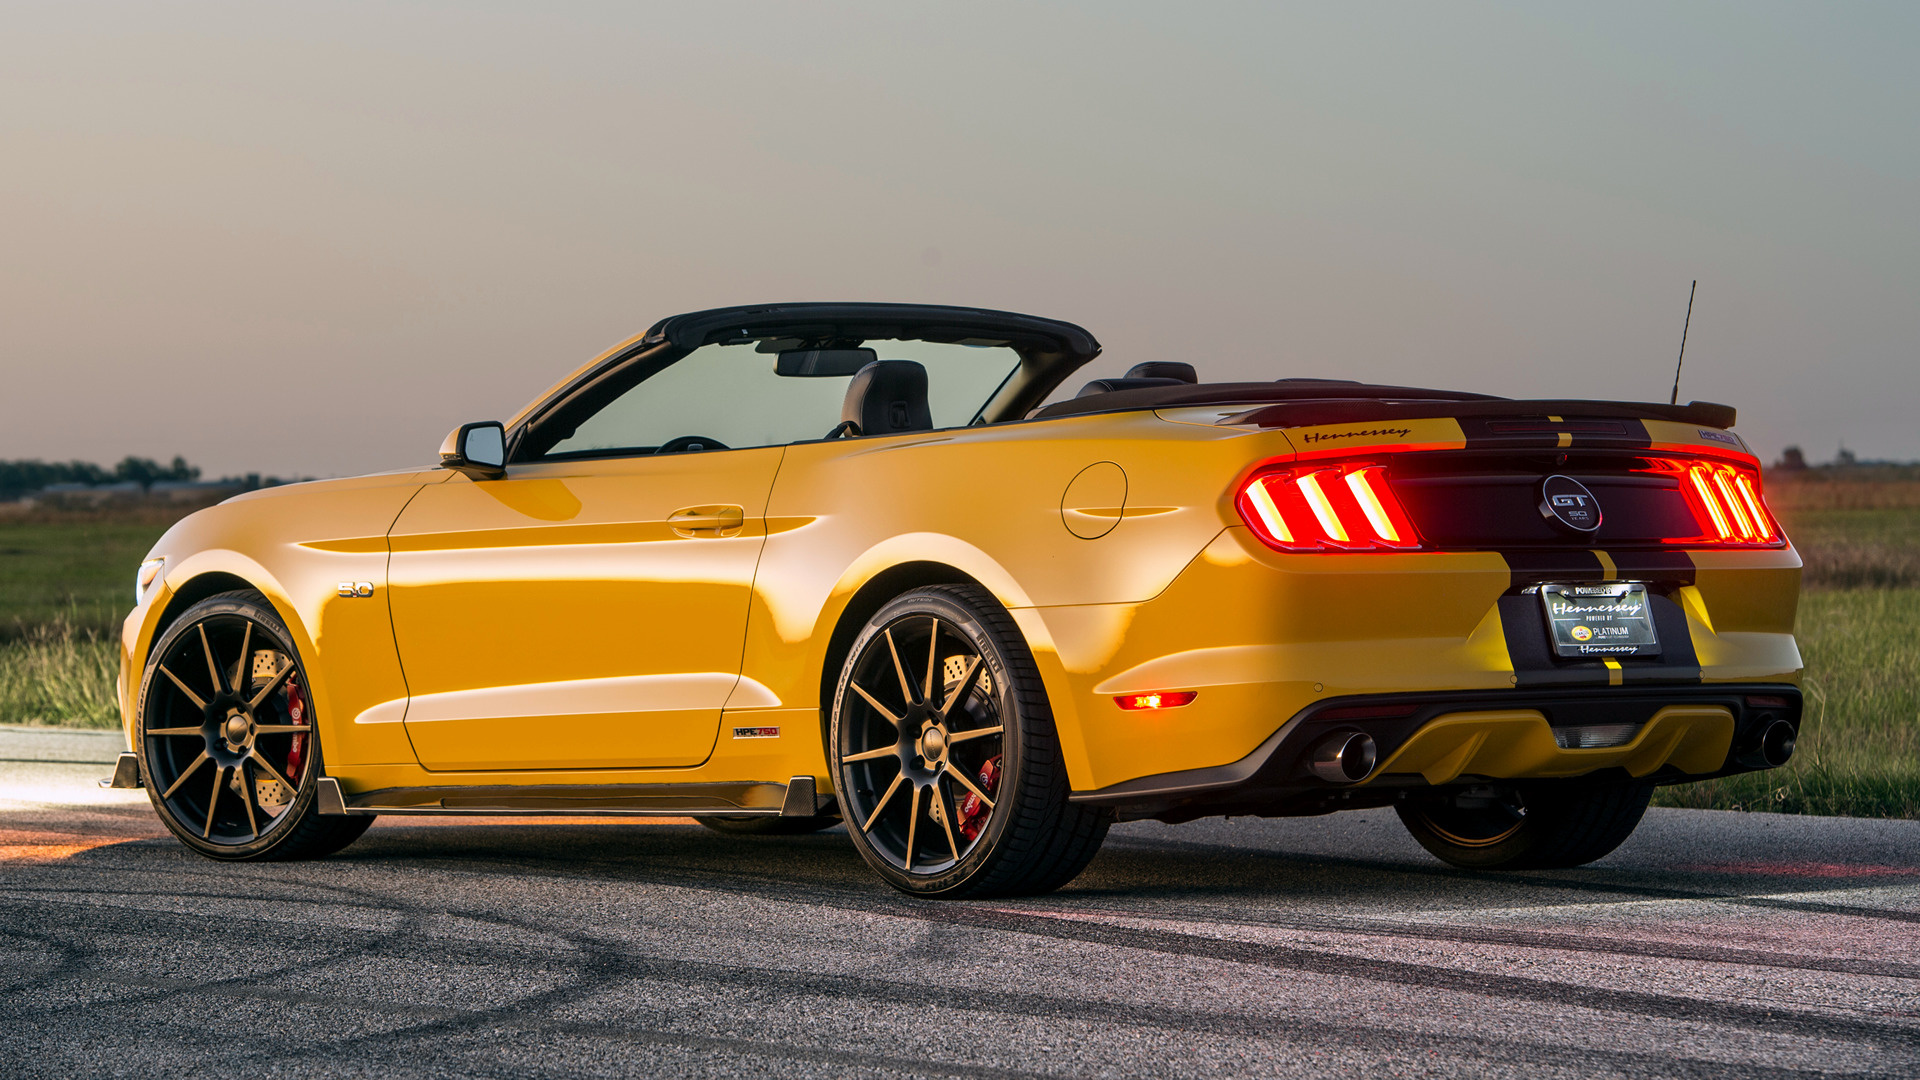 Mustang Gt Convertible Hpe750 Supercharged Wallpaper And HD